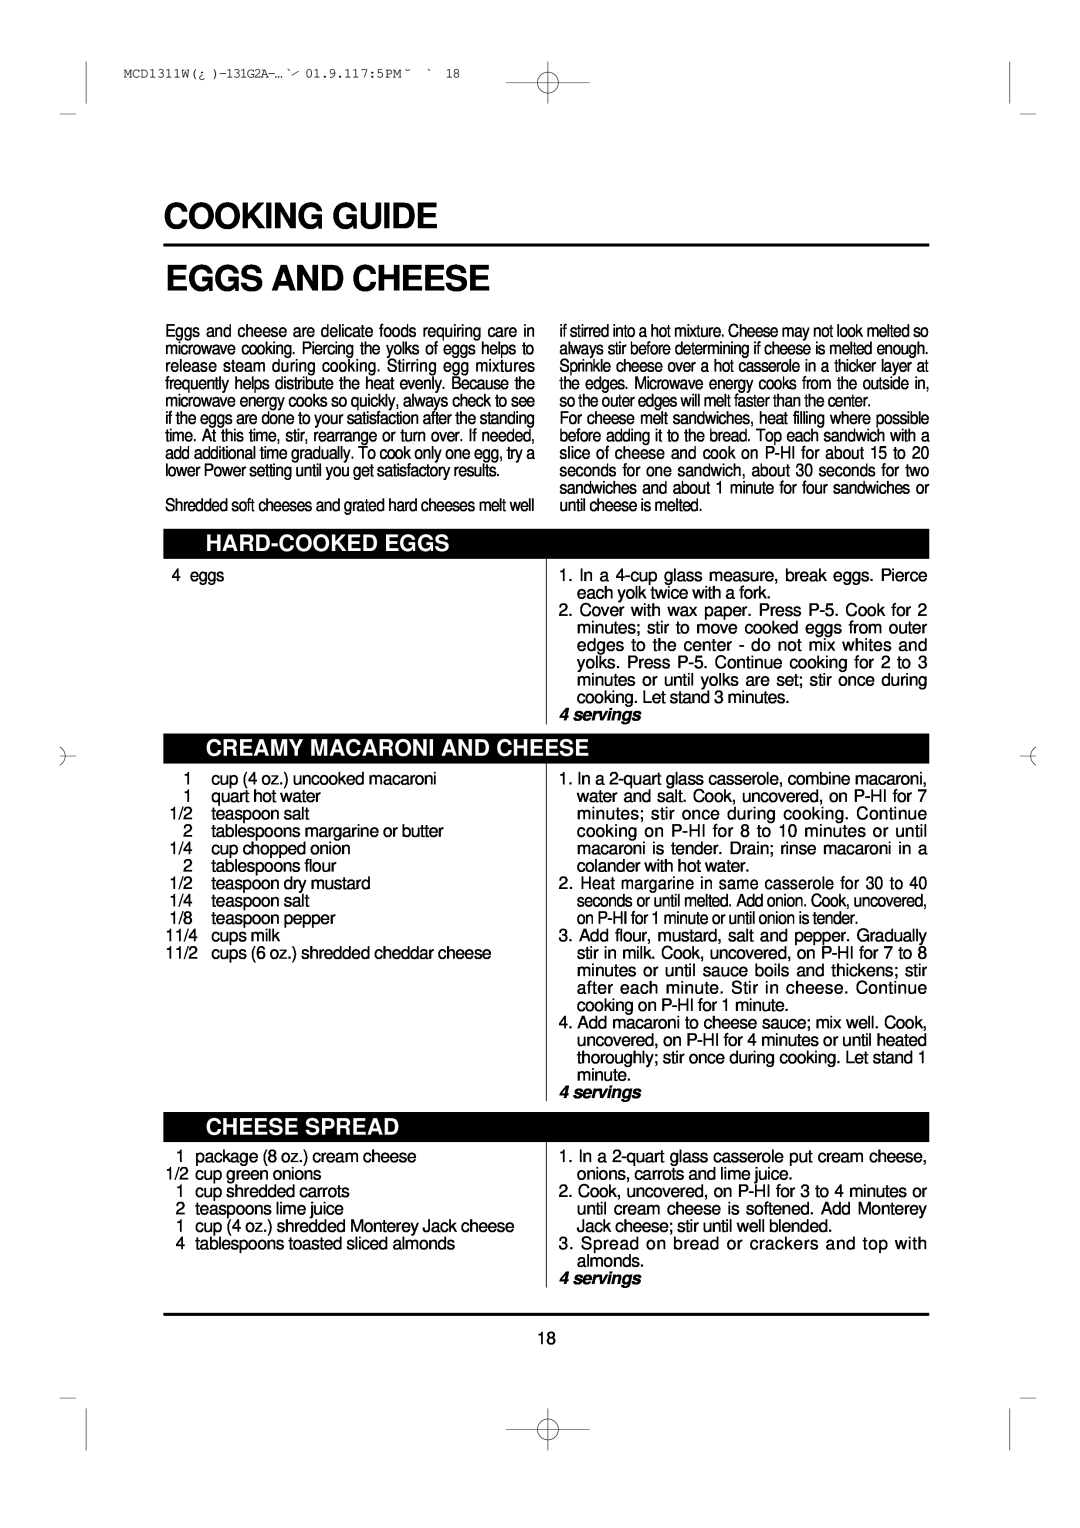 Magic Chef MCD1311W Cooking Guide Eggs And Cheese, Hard-Cookedeggs, Creamy Macaroni And Cheese, Cheese Spread, servings 